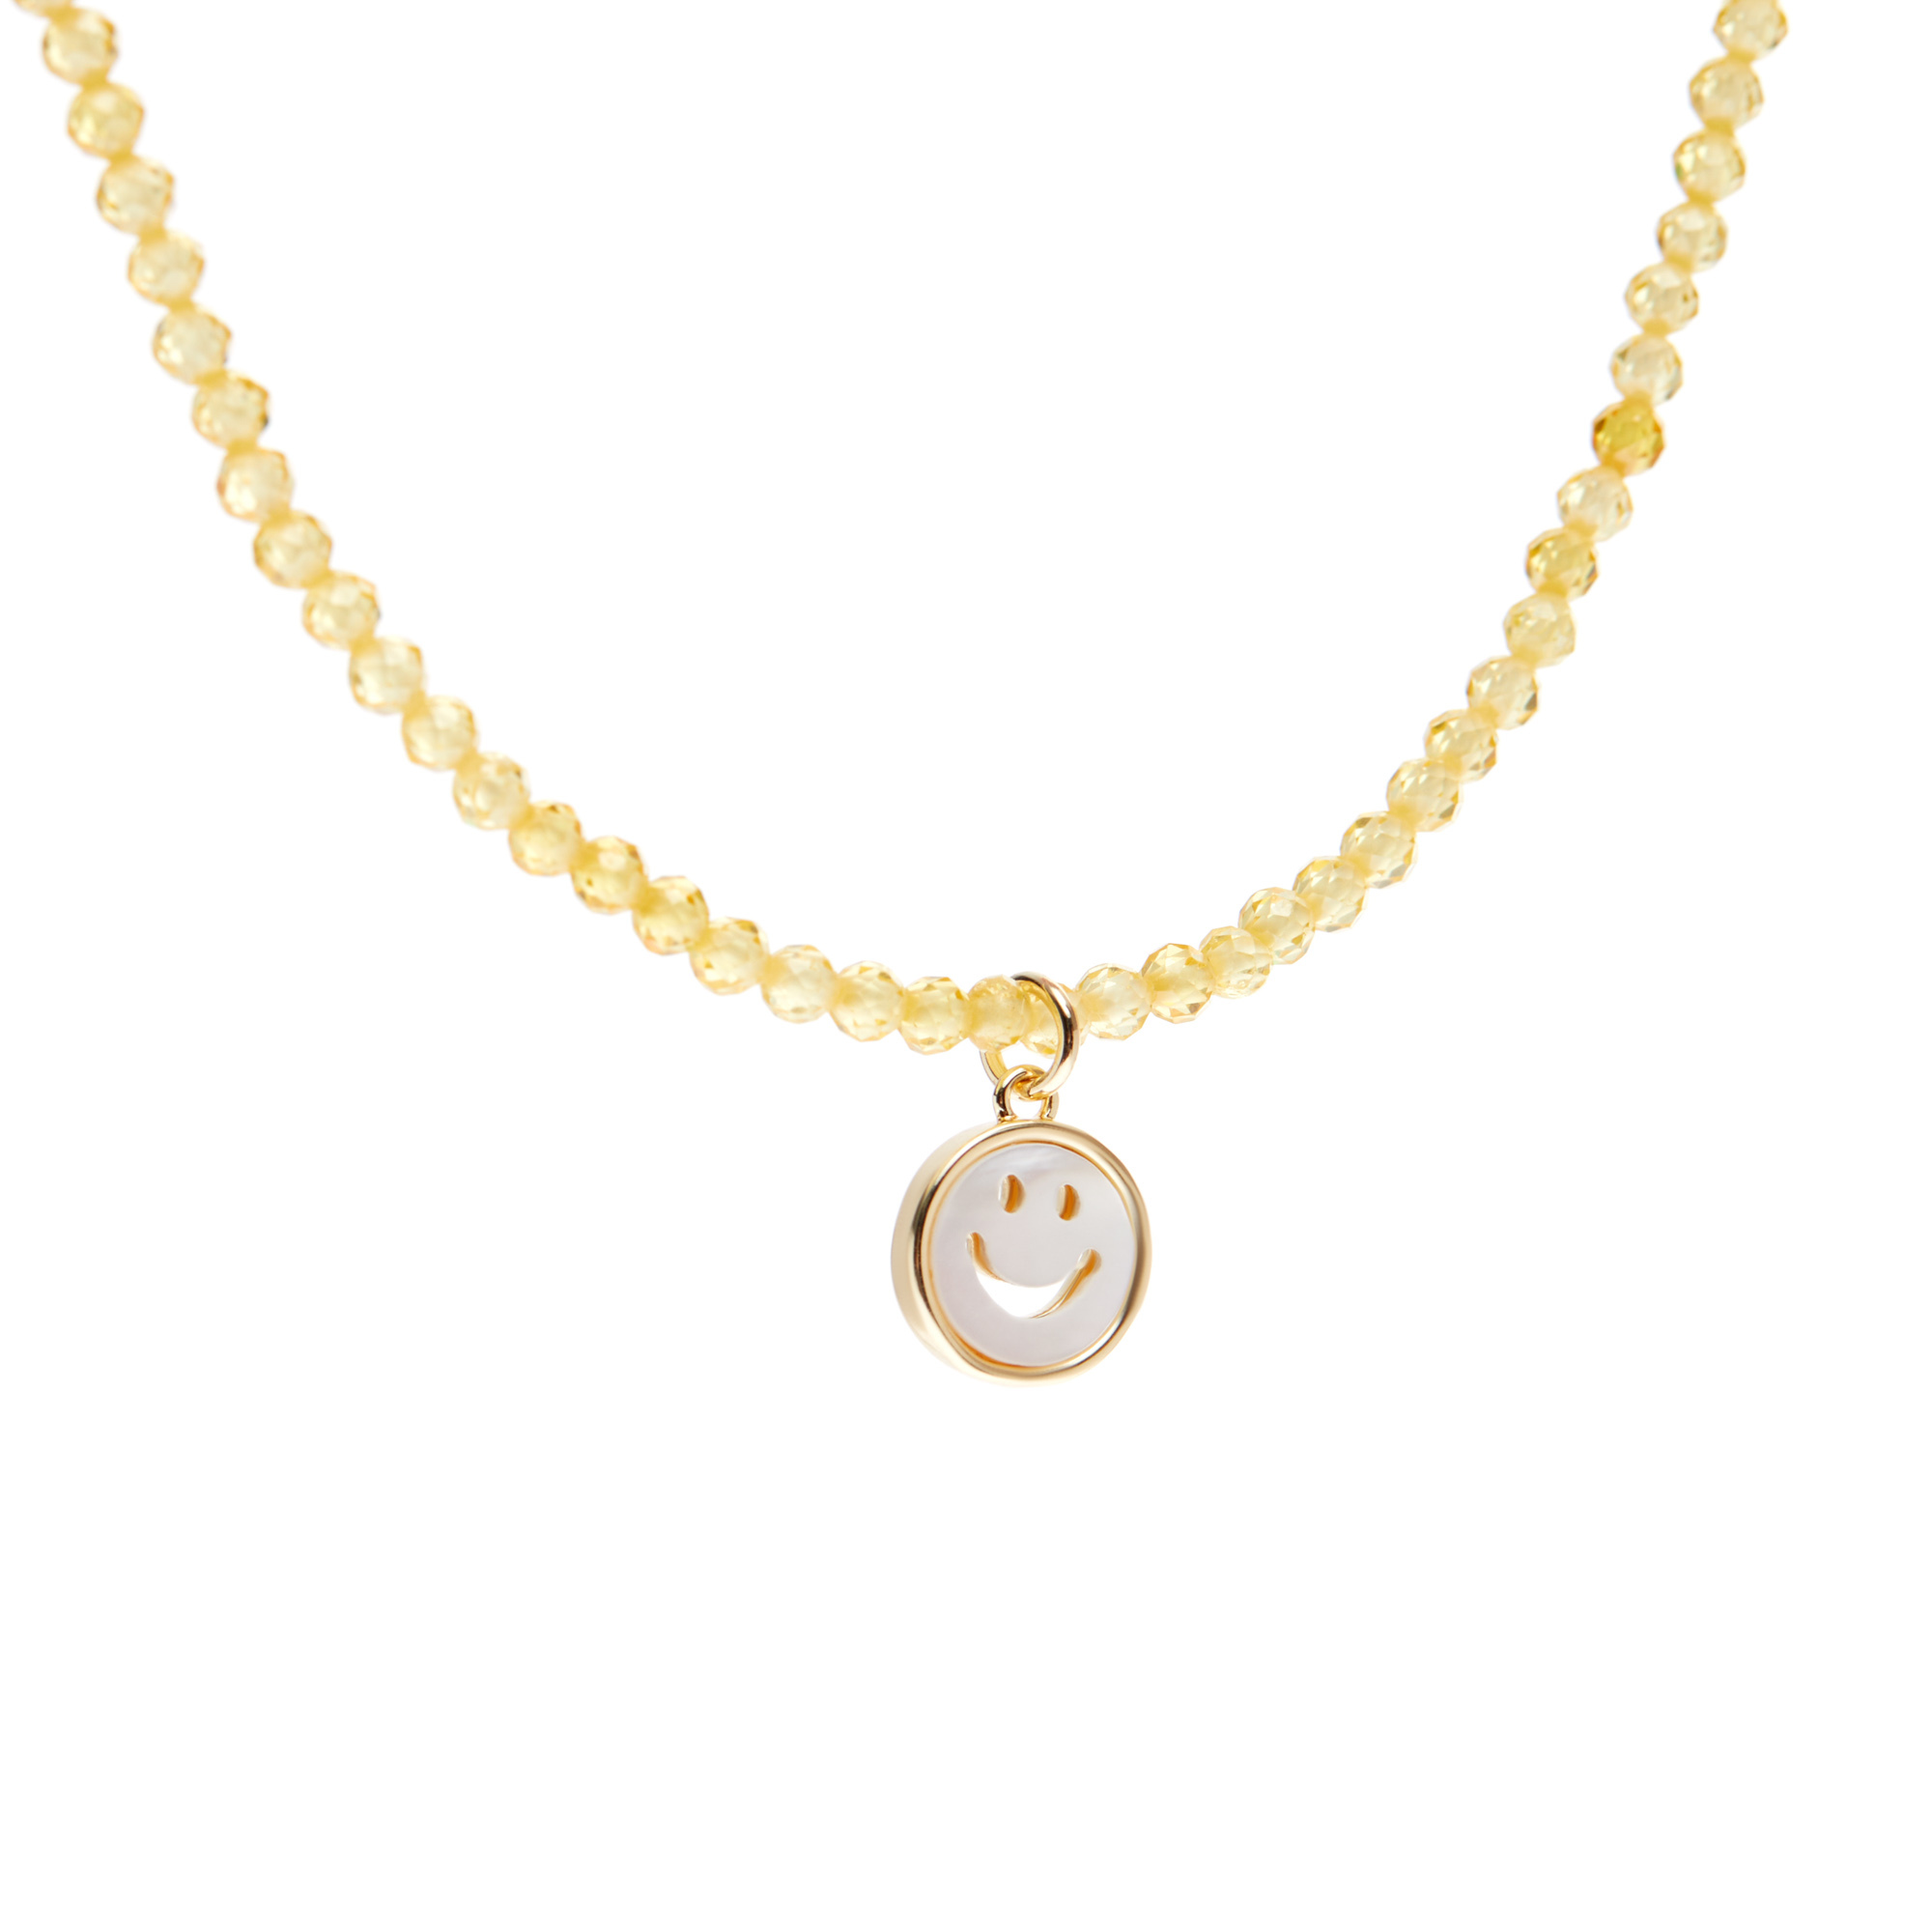 HOLLY JUNE Колье Sunny Smile Necklace колье holly june sunny smile necklace 1 шт